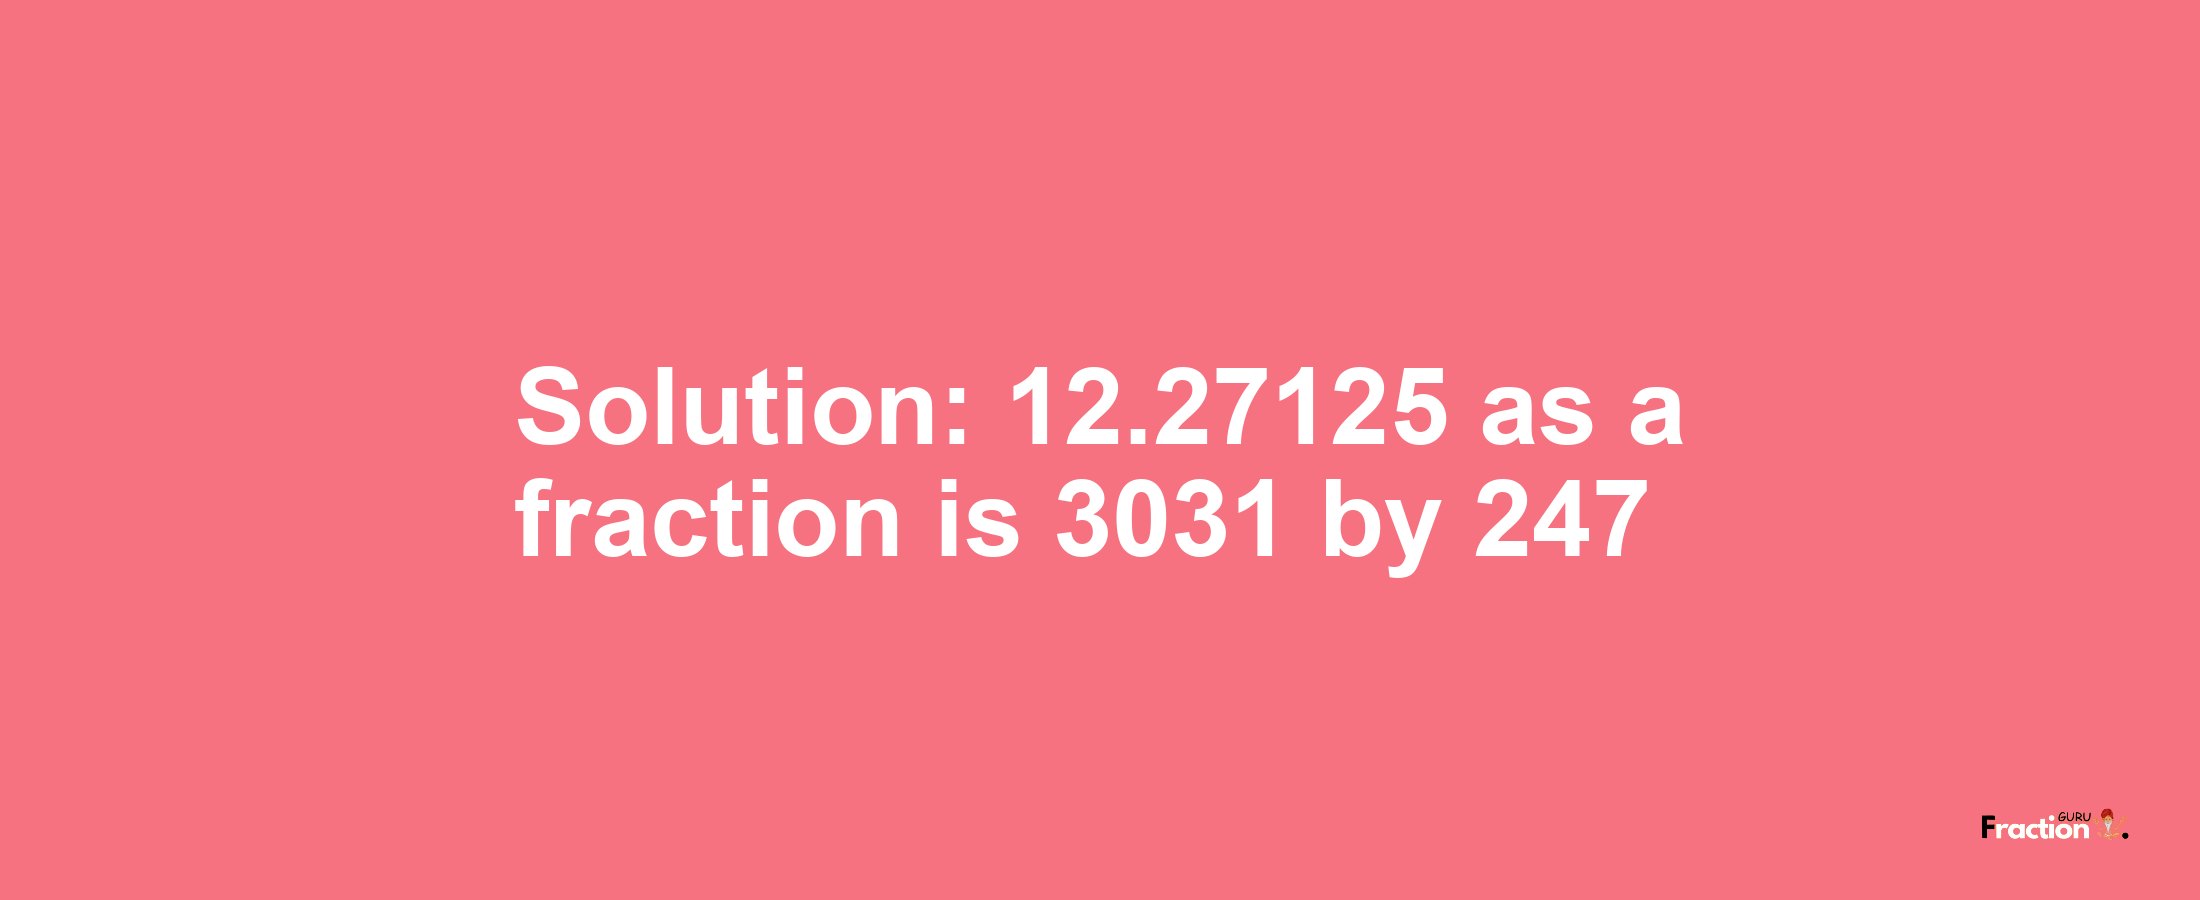 Solution:12.27125 as a fraction is 3031/247